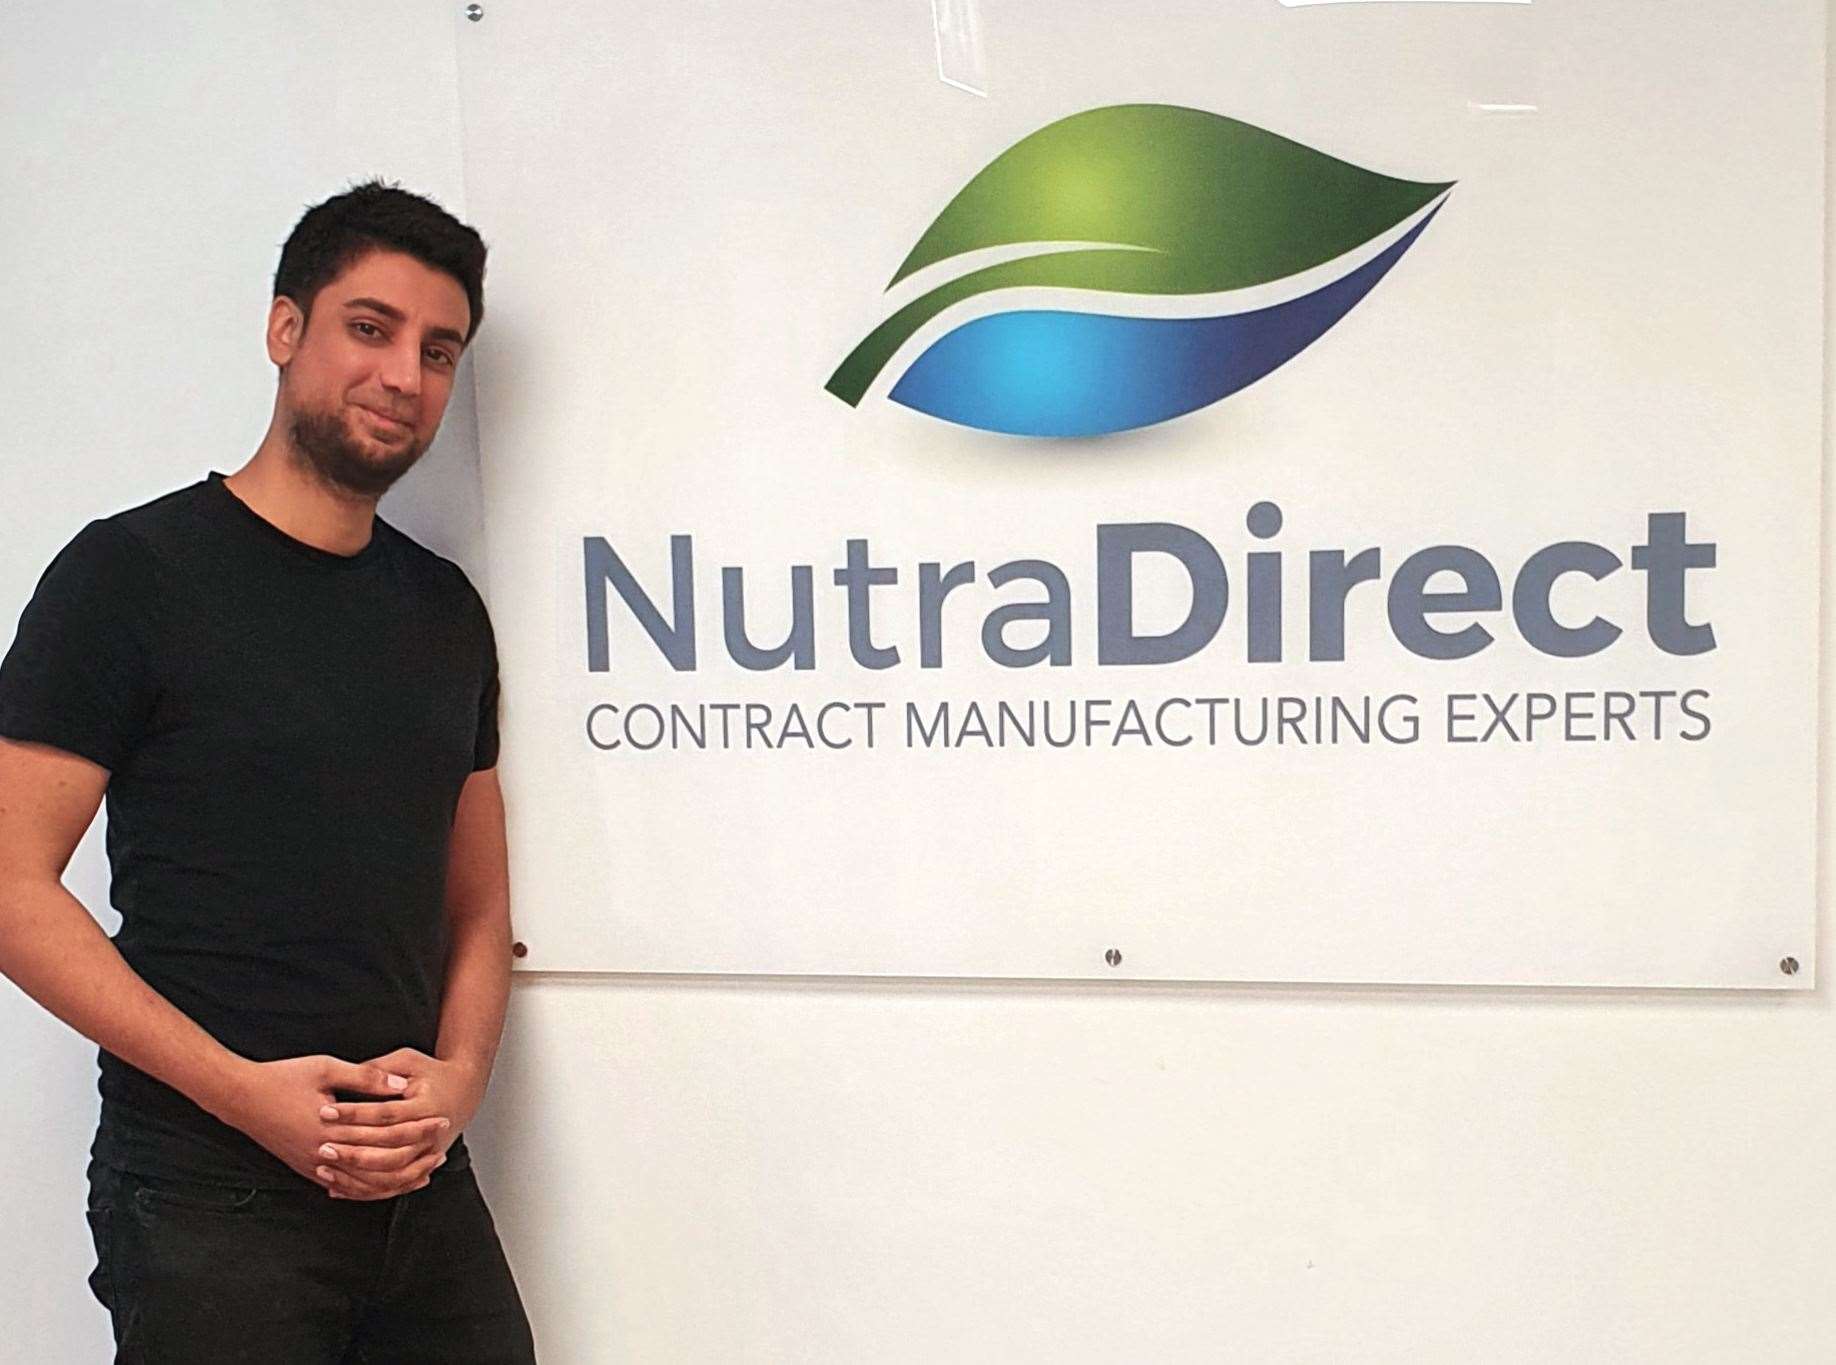 Bal Sandher has been named Entrepreneur of the Year for his work at Hectic Lifestyles, trading as NutraDirect